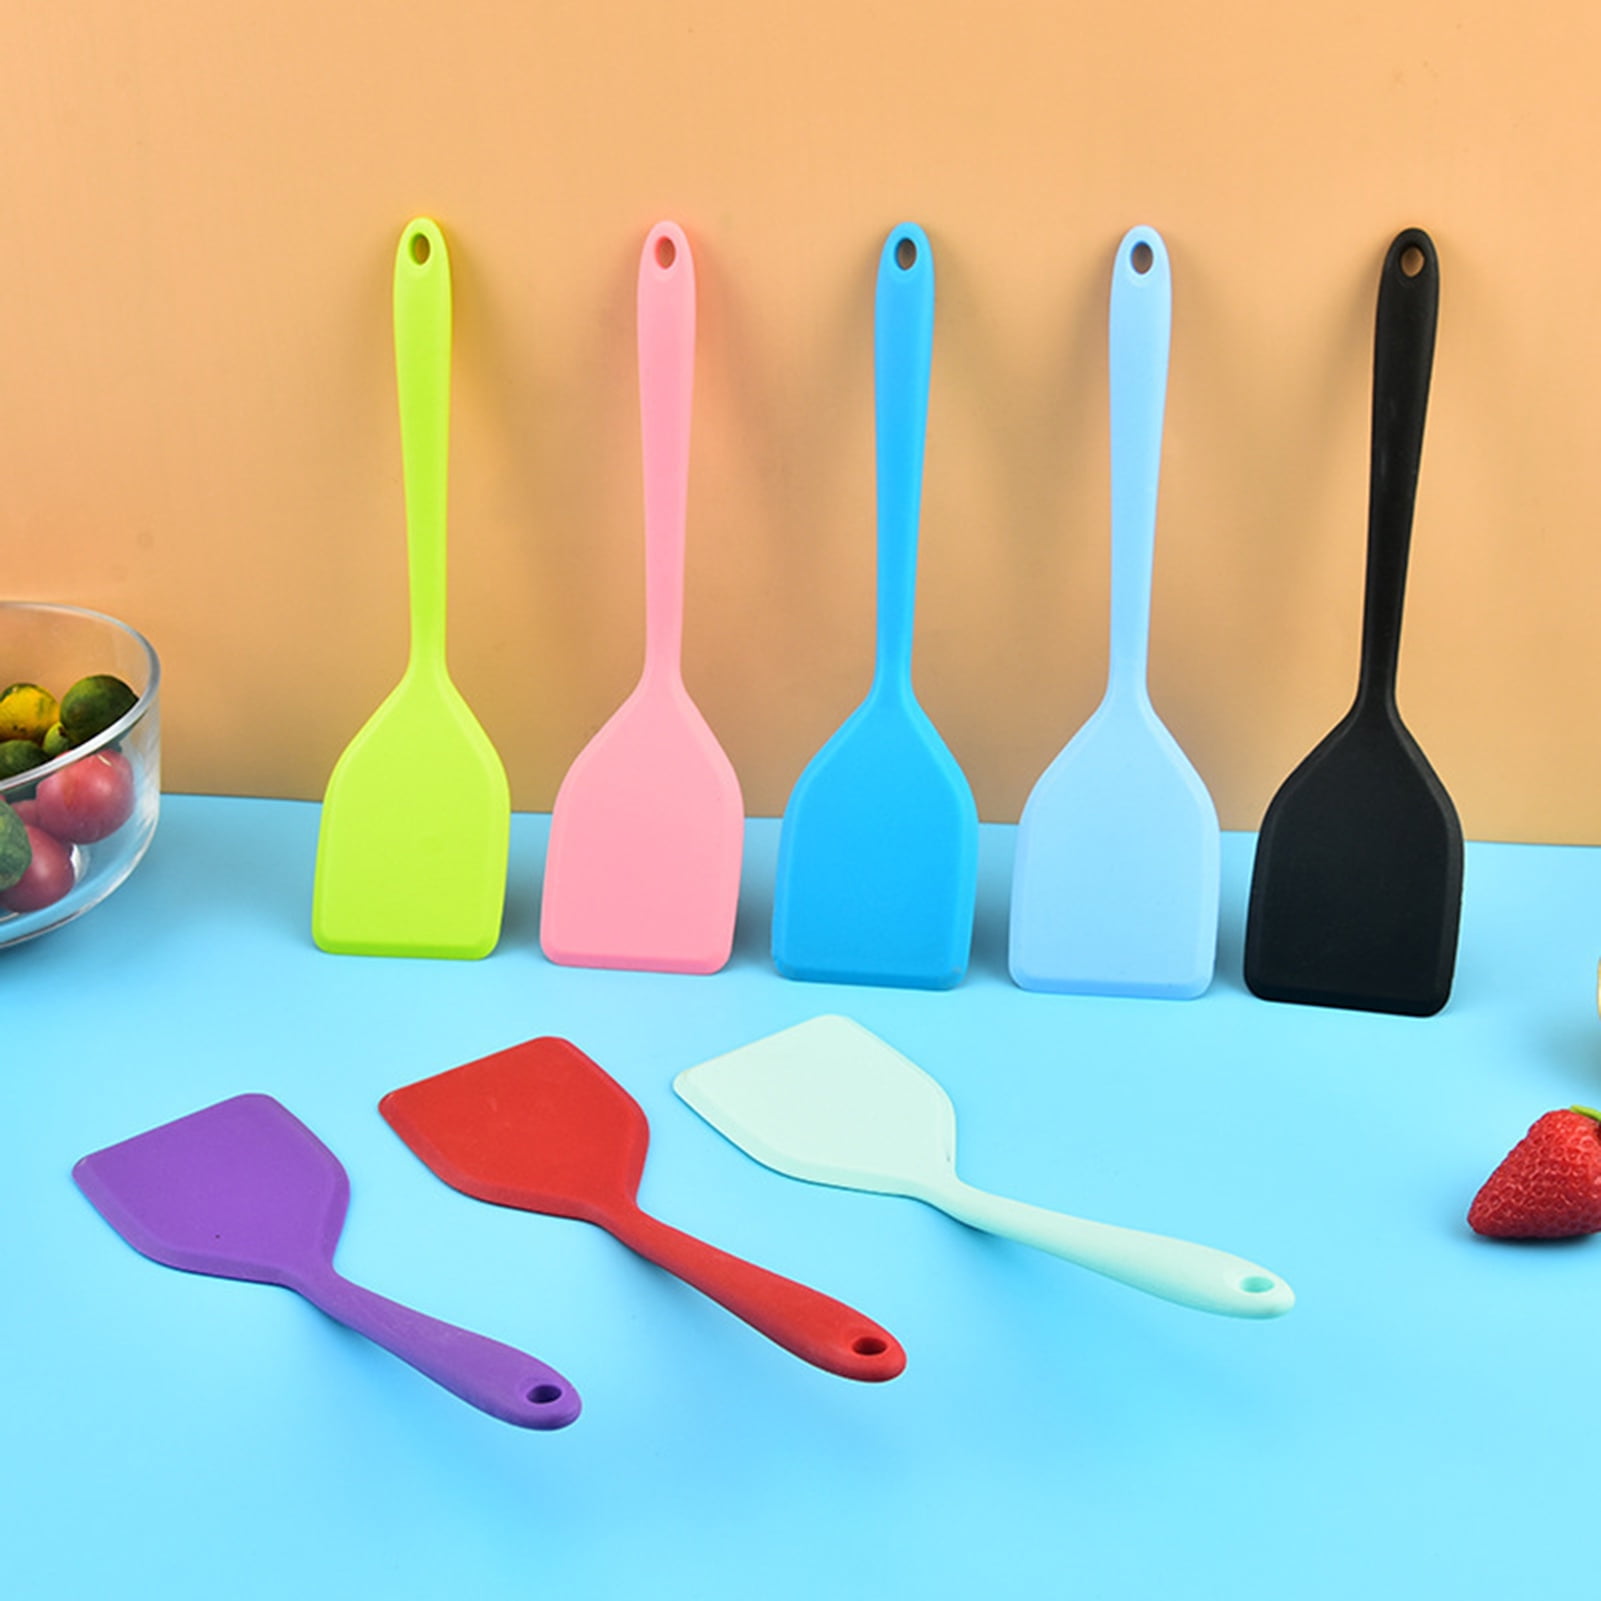 Utensils To Use When 'Folding' – BakeClub